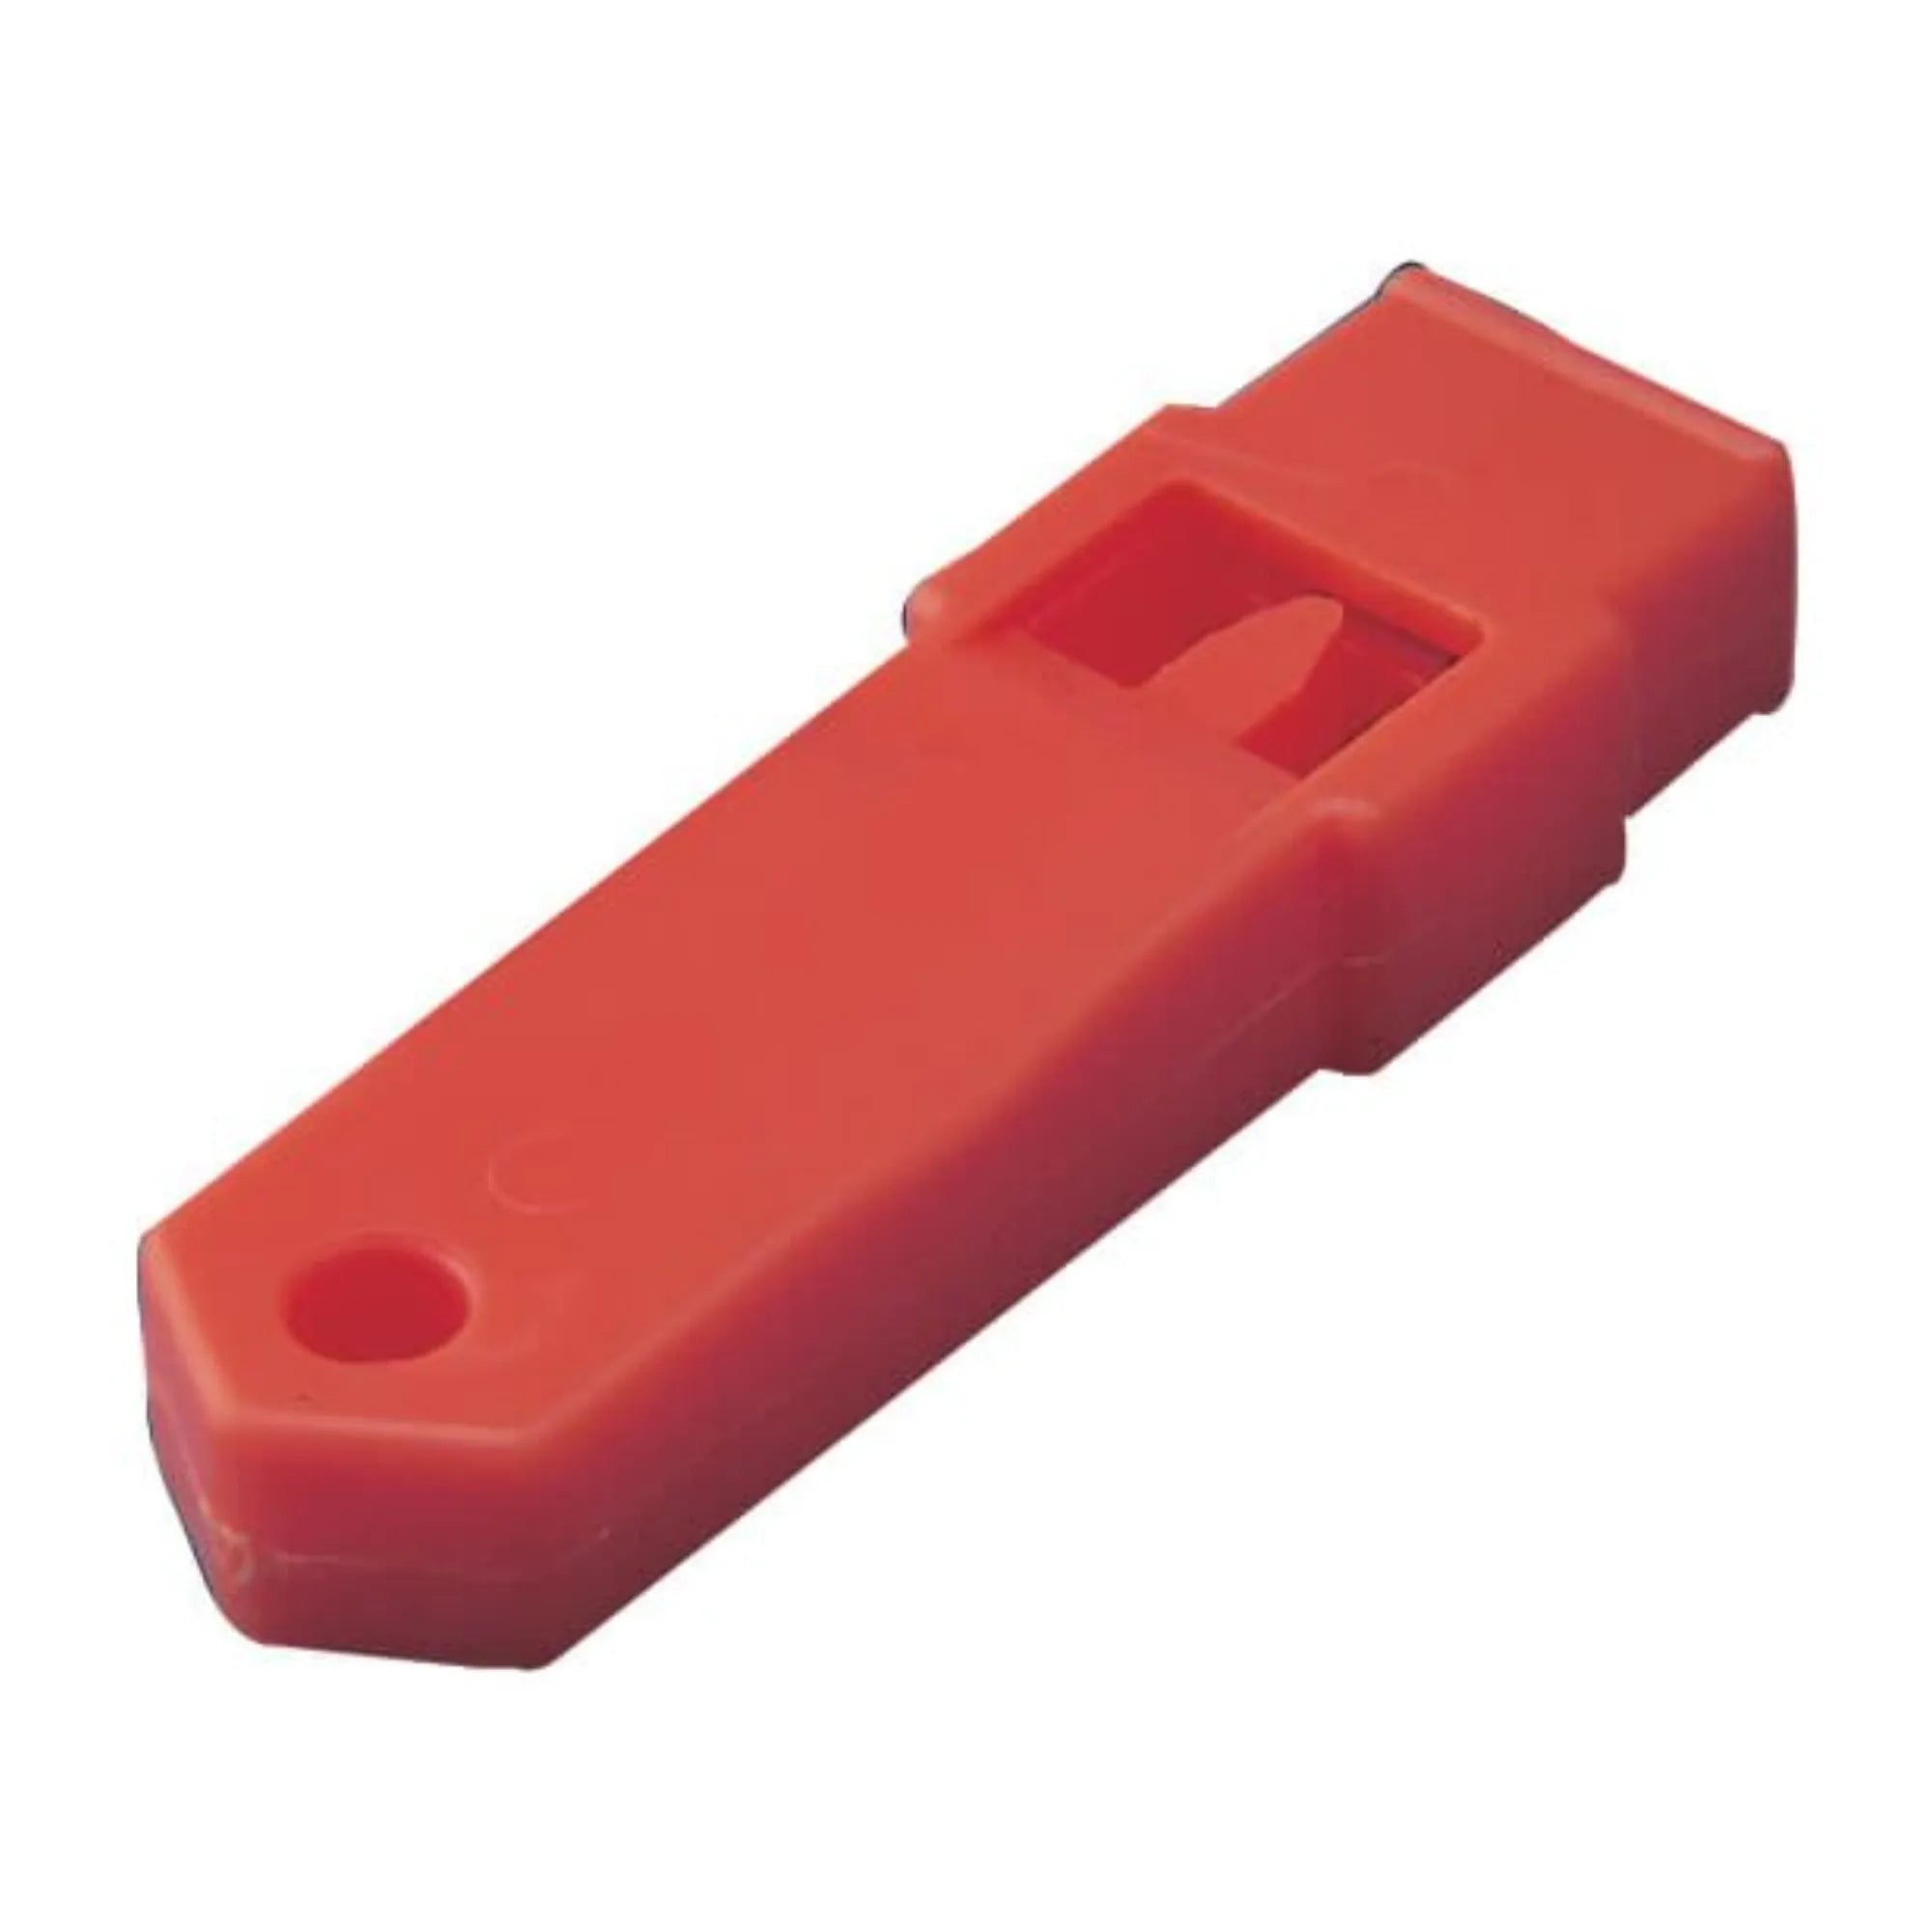 Plastic Safety Whistle